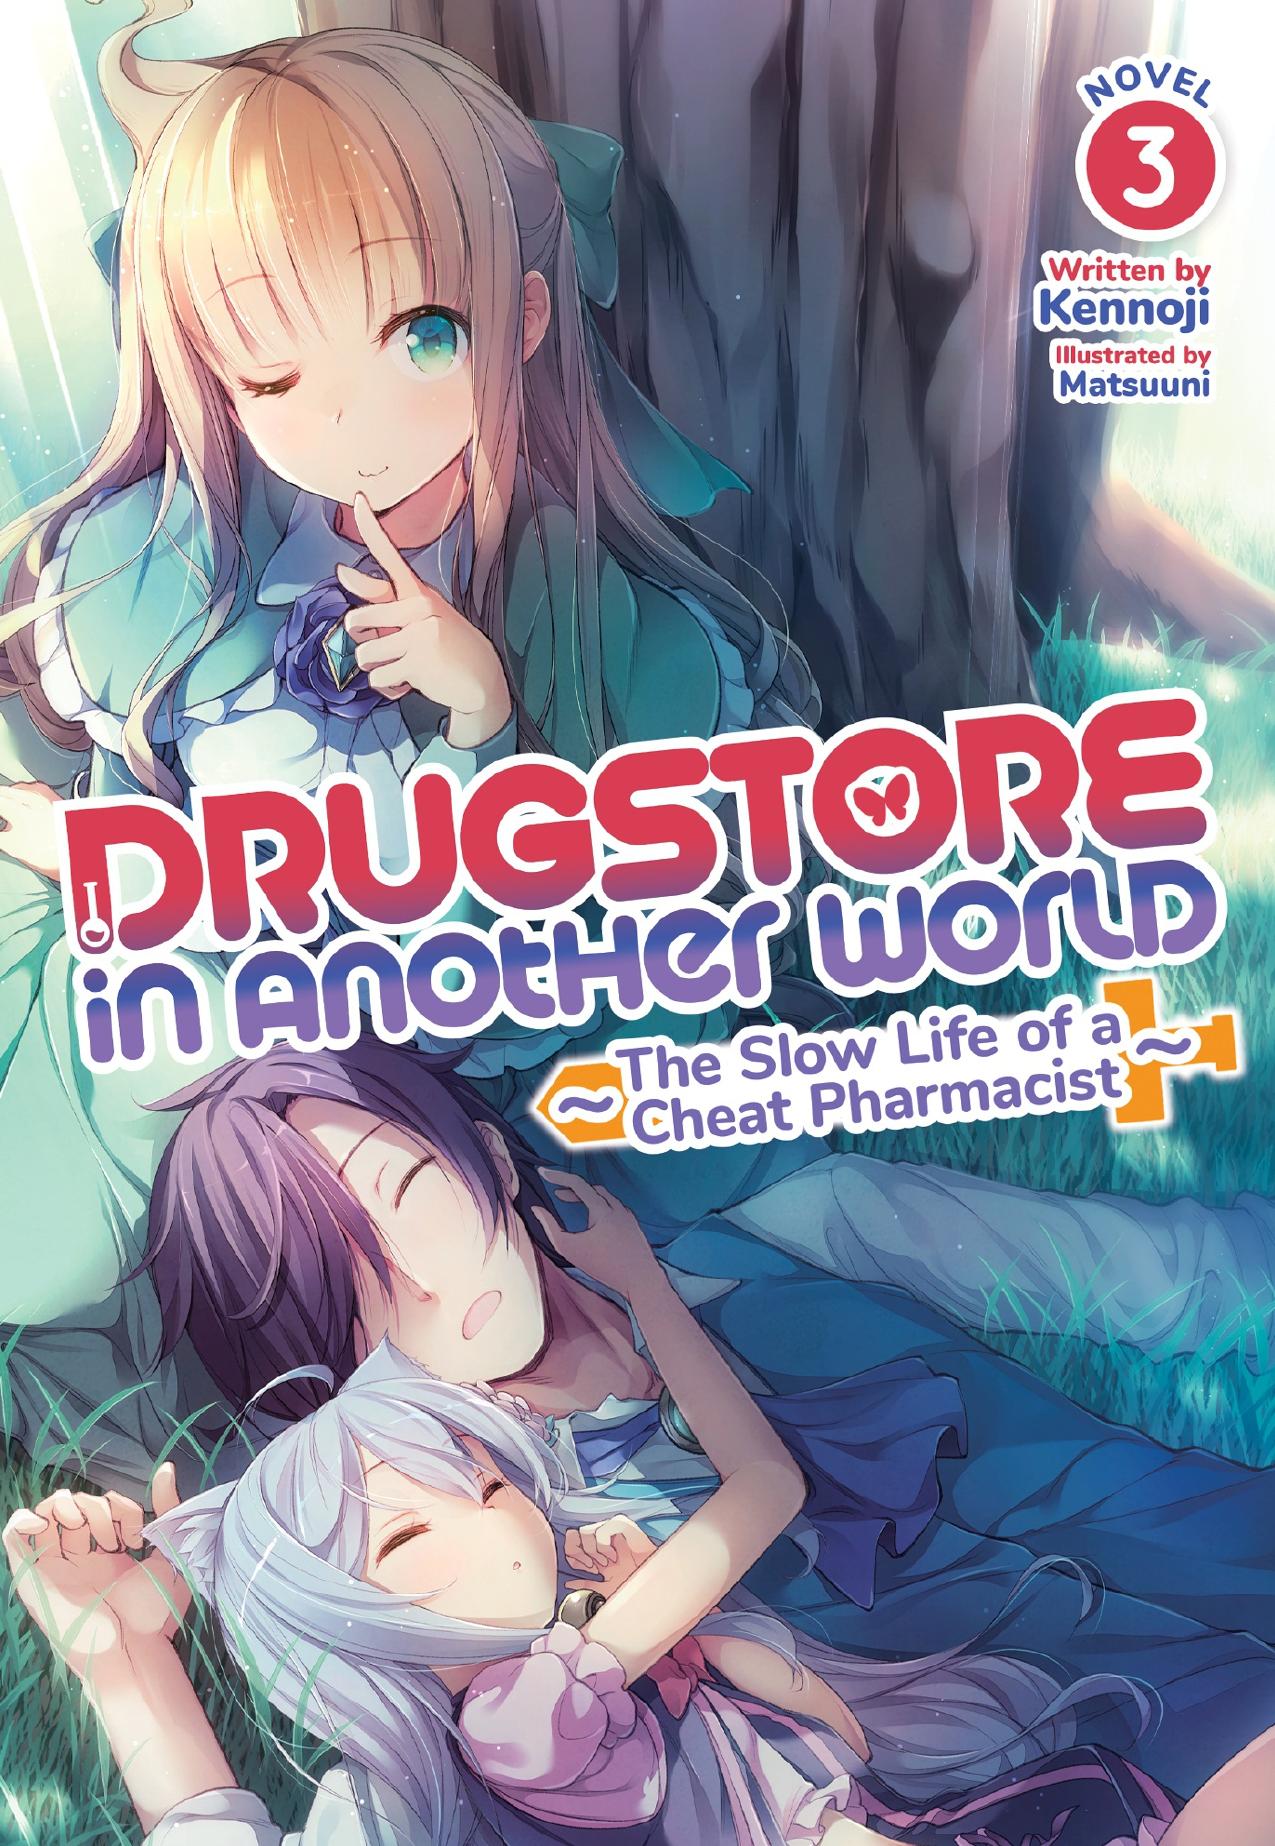 Drugstore in Another World: The Slow Life of a Cheat Pharmacist Vol. 3 by Kennoji